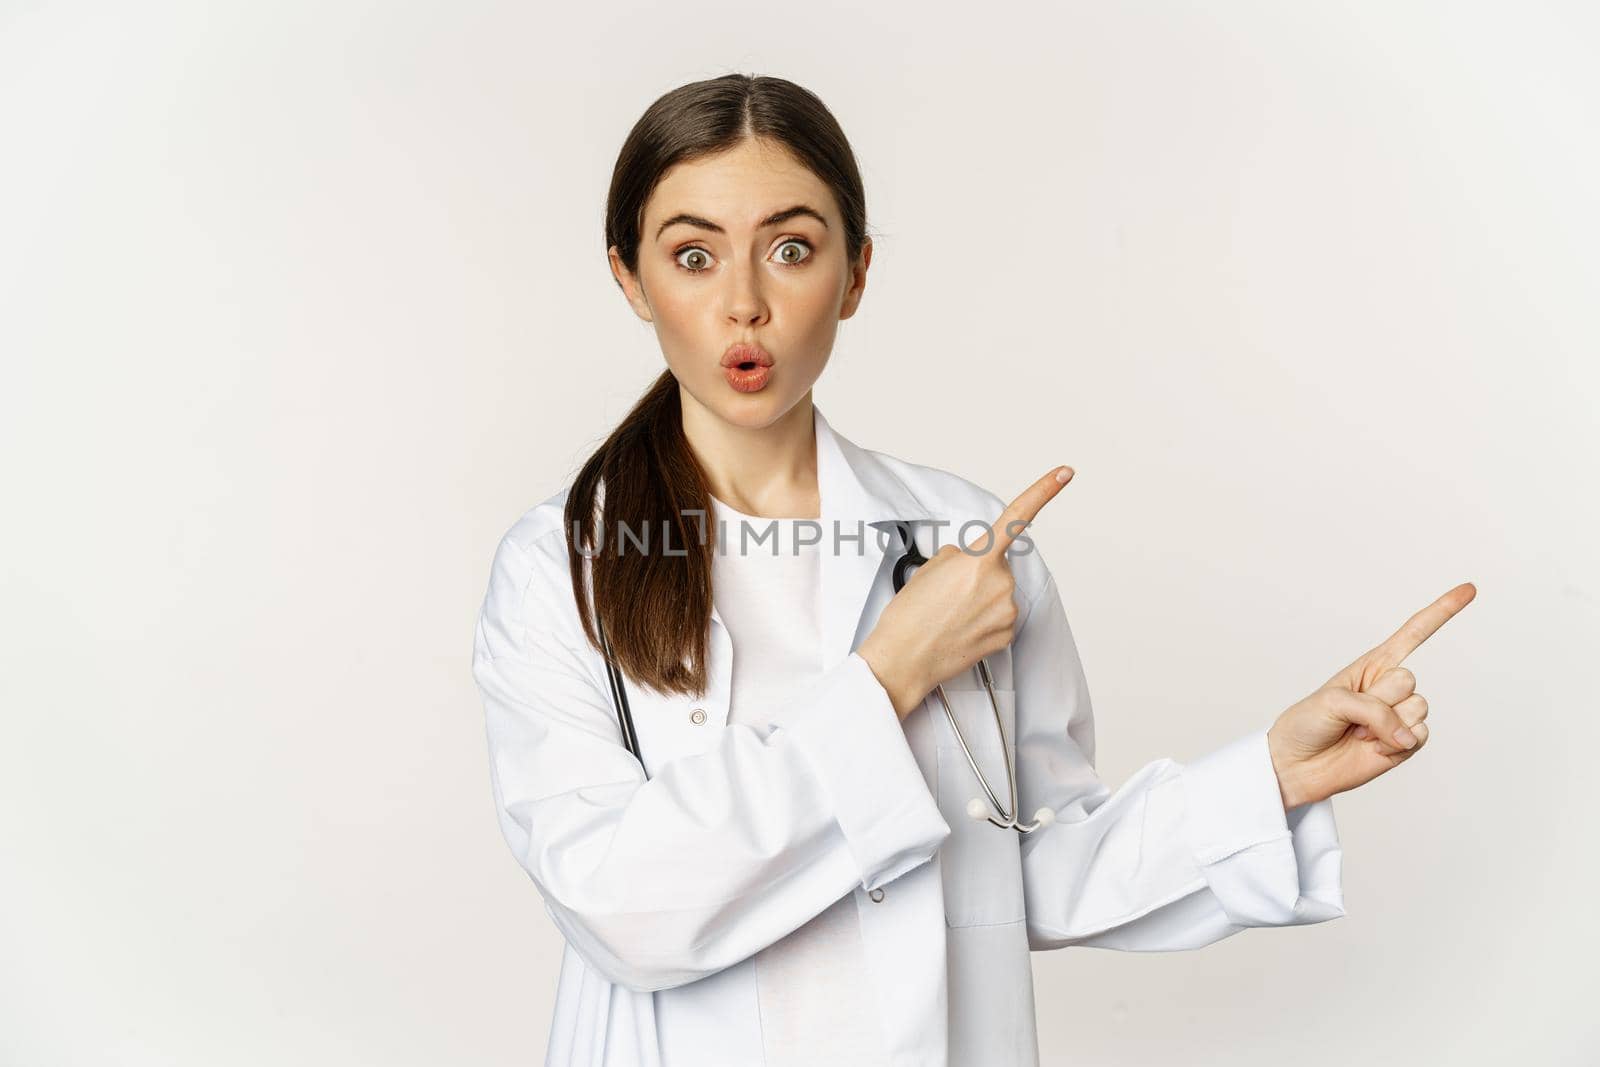 Woman doctor, physician in medical uniform, pointing fingers right, showing banner advertisement, smiling amazed, checking out promo discount, white background.